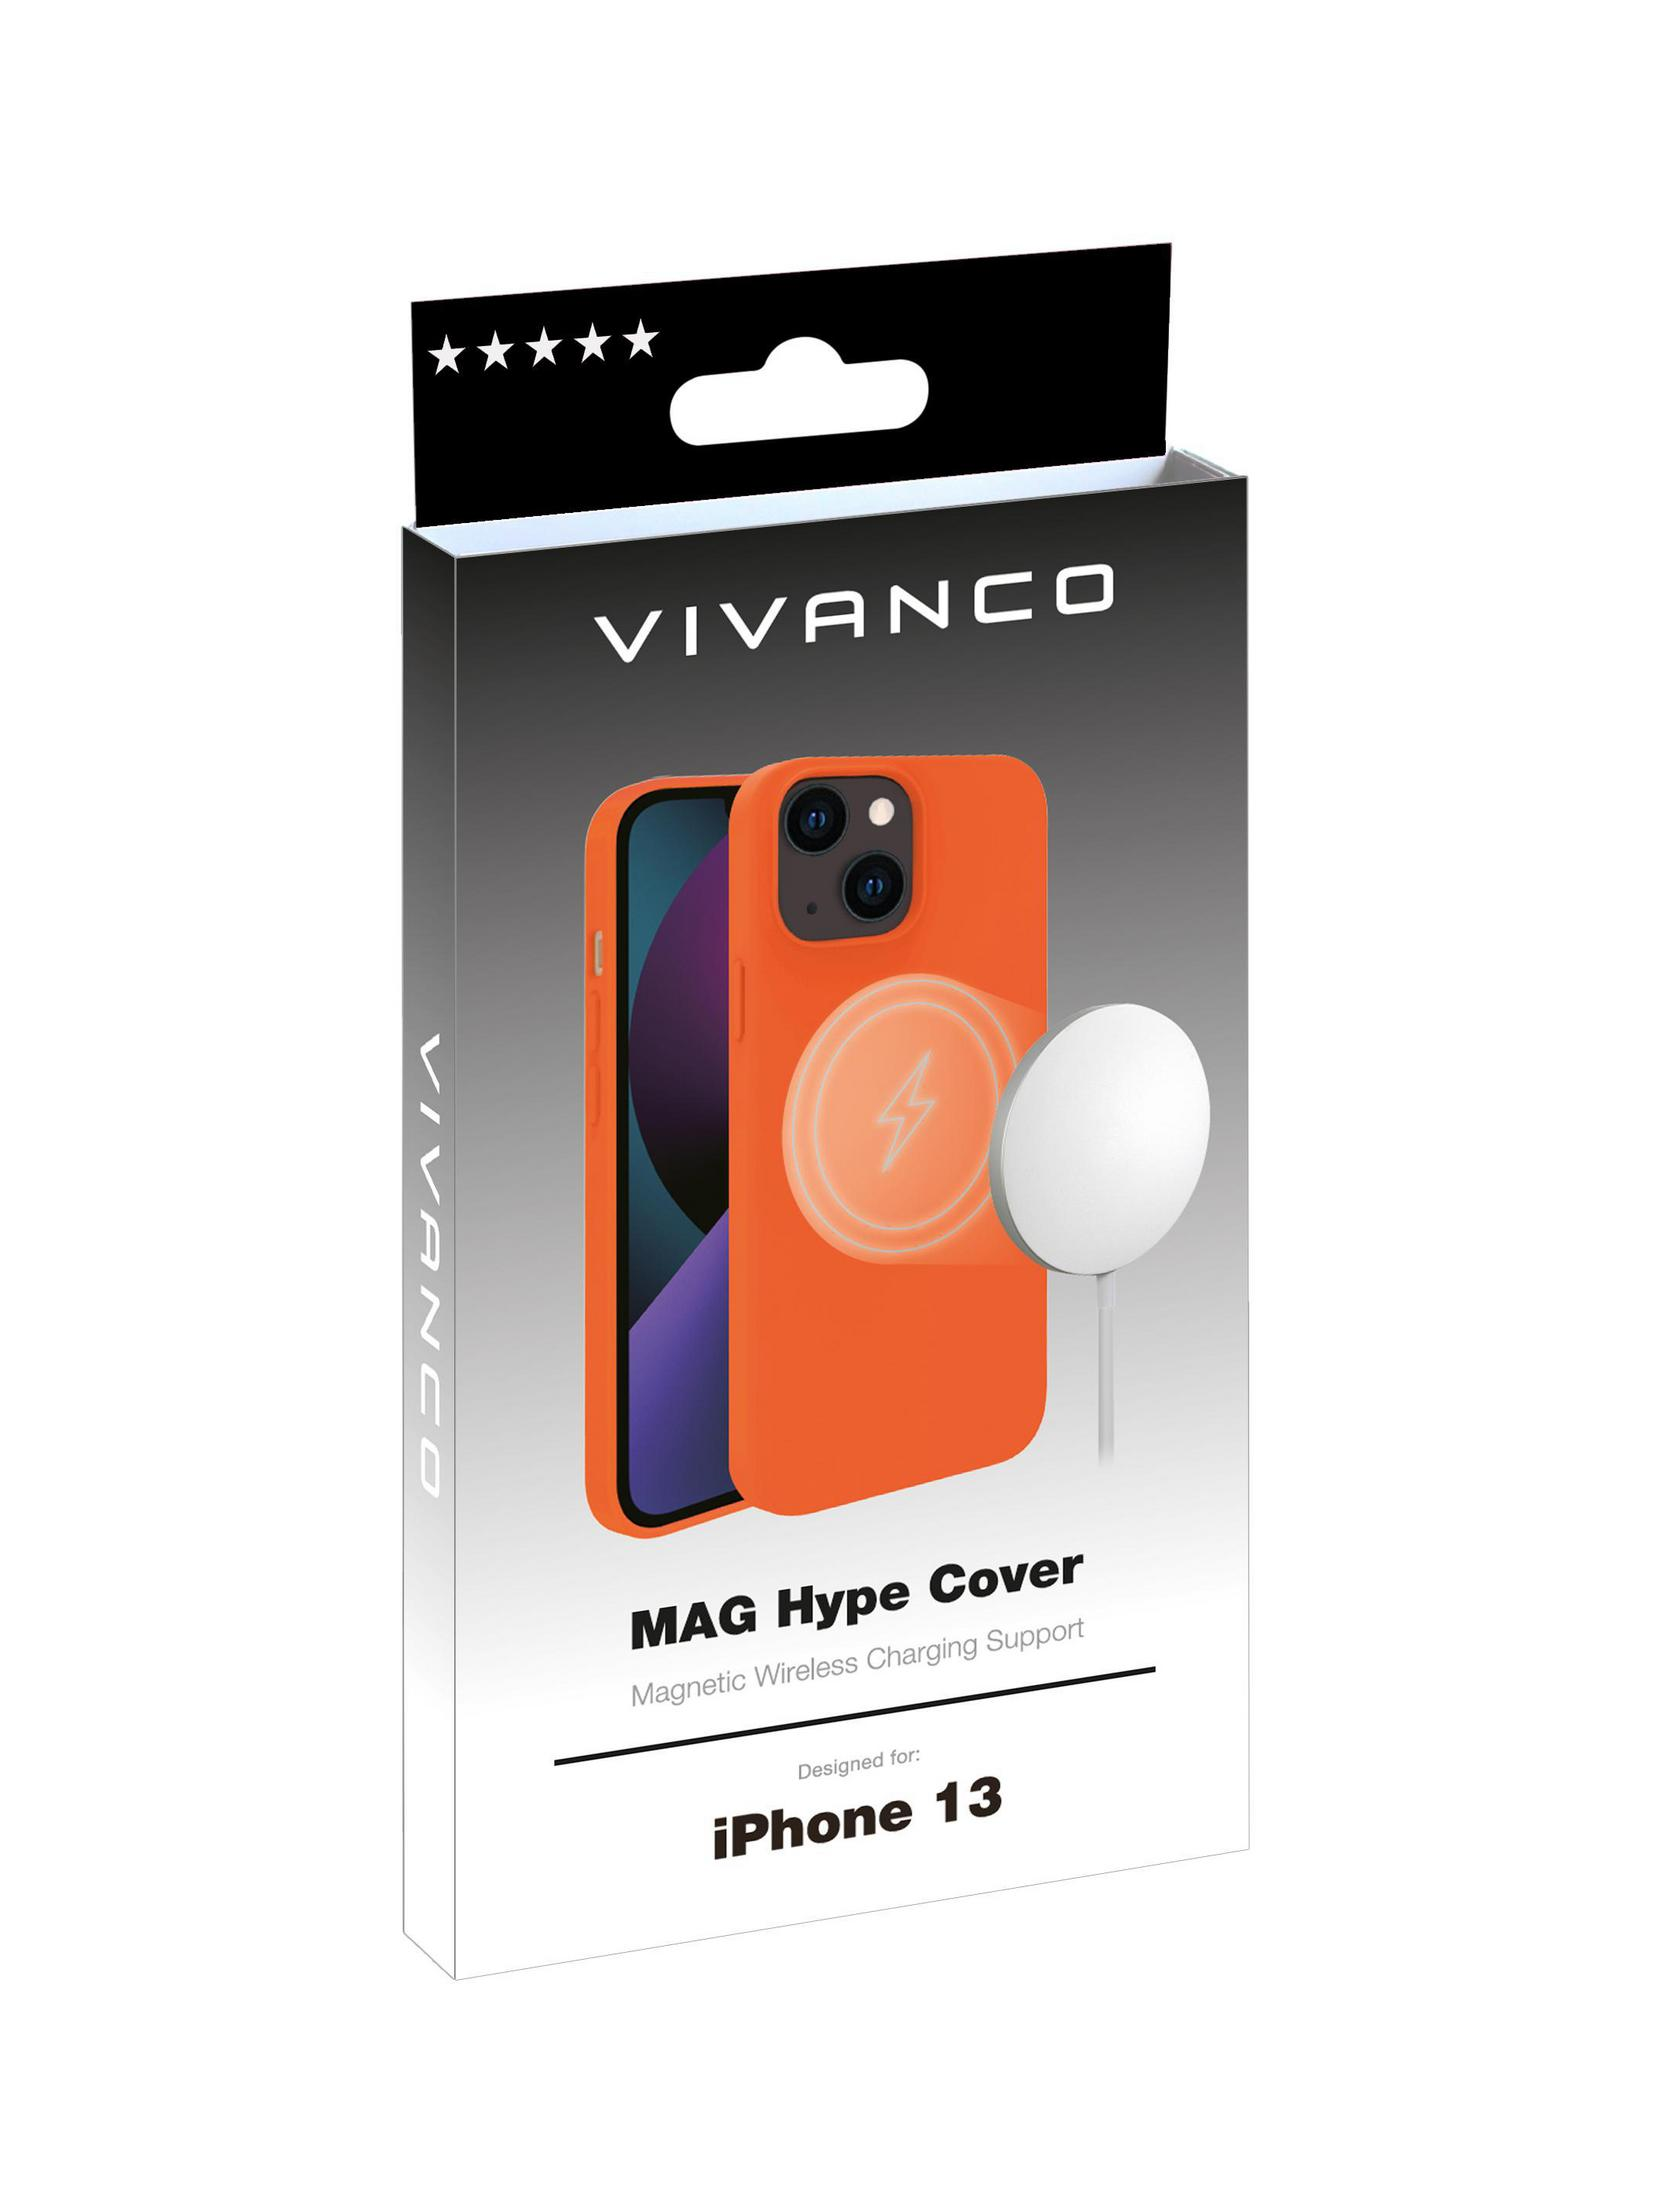 Orange iPhone 13, COVER MAGHYPE Backcover, OR, Apple, 62946 IPH13 VIVANCO